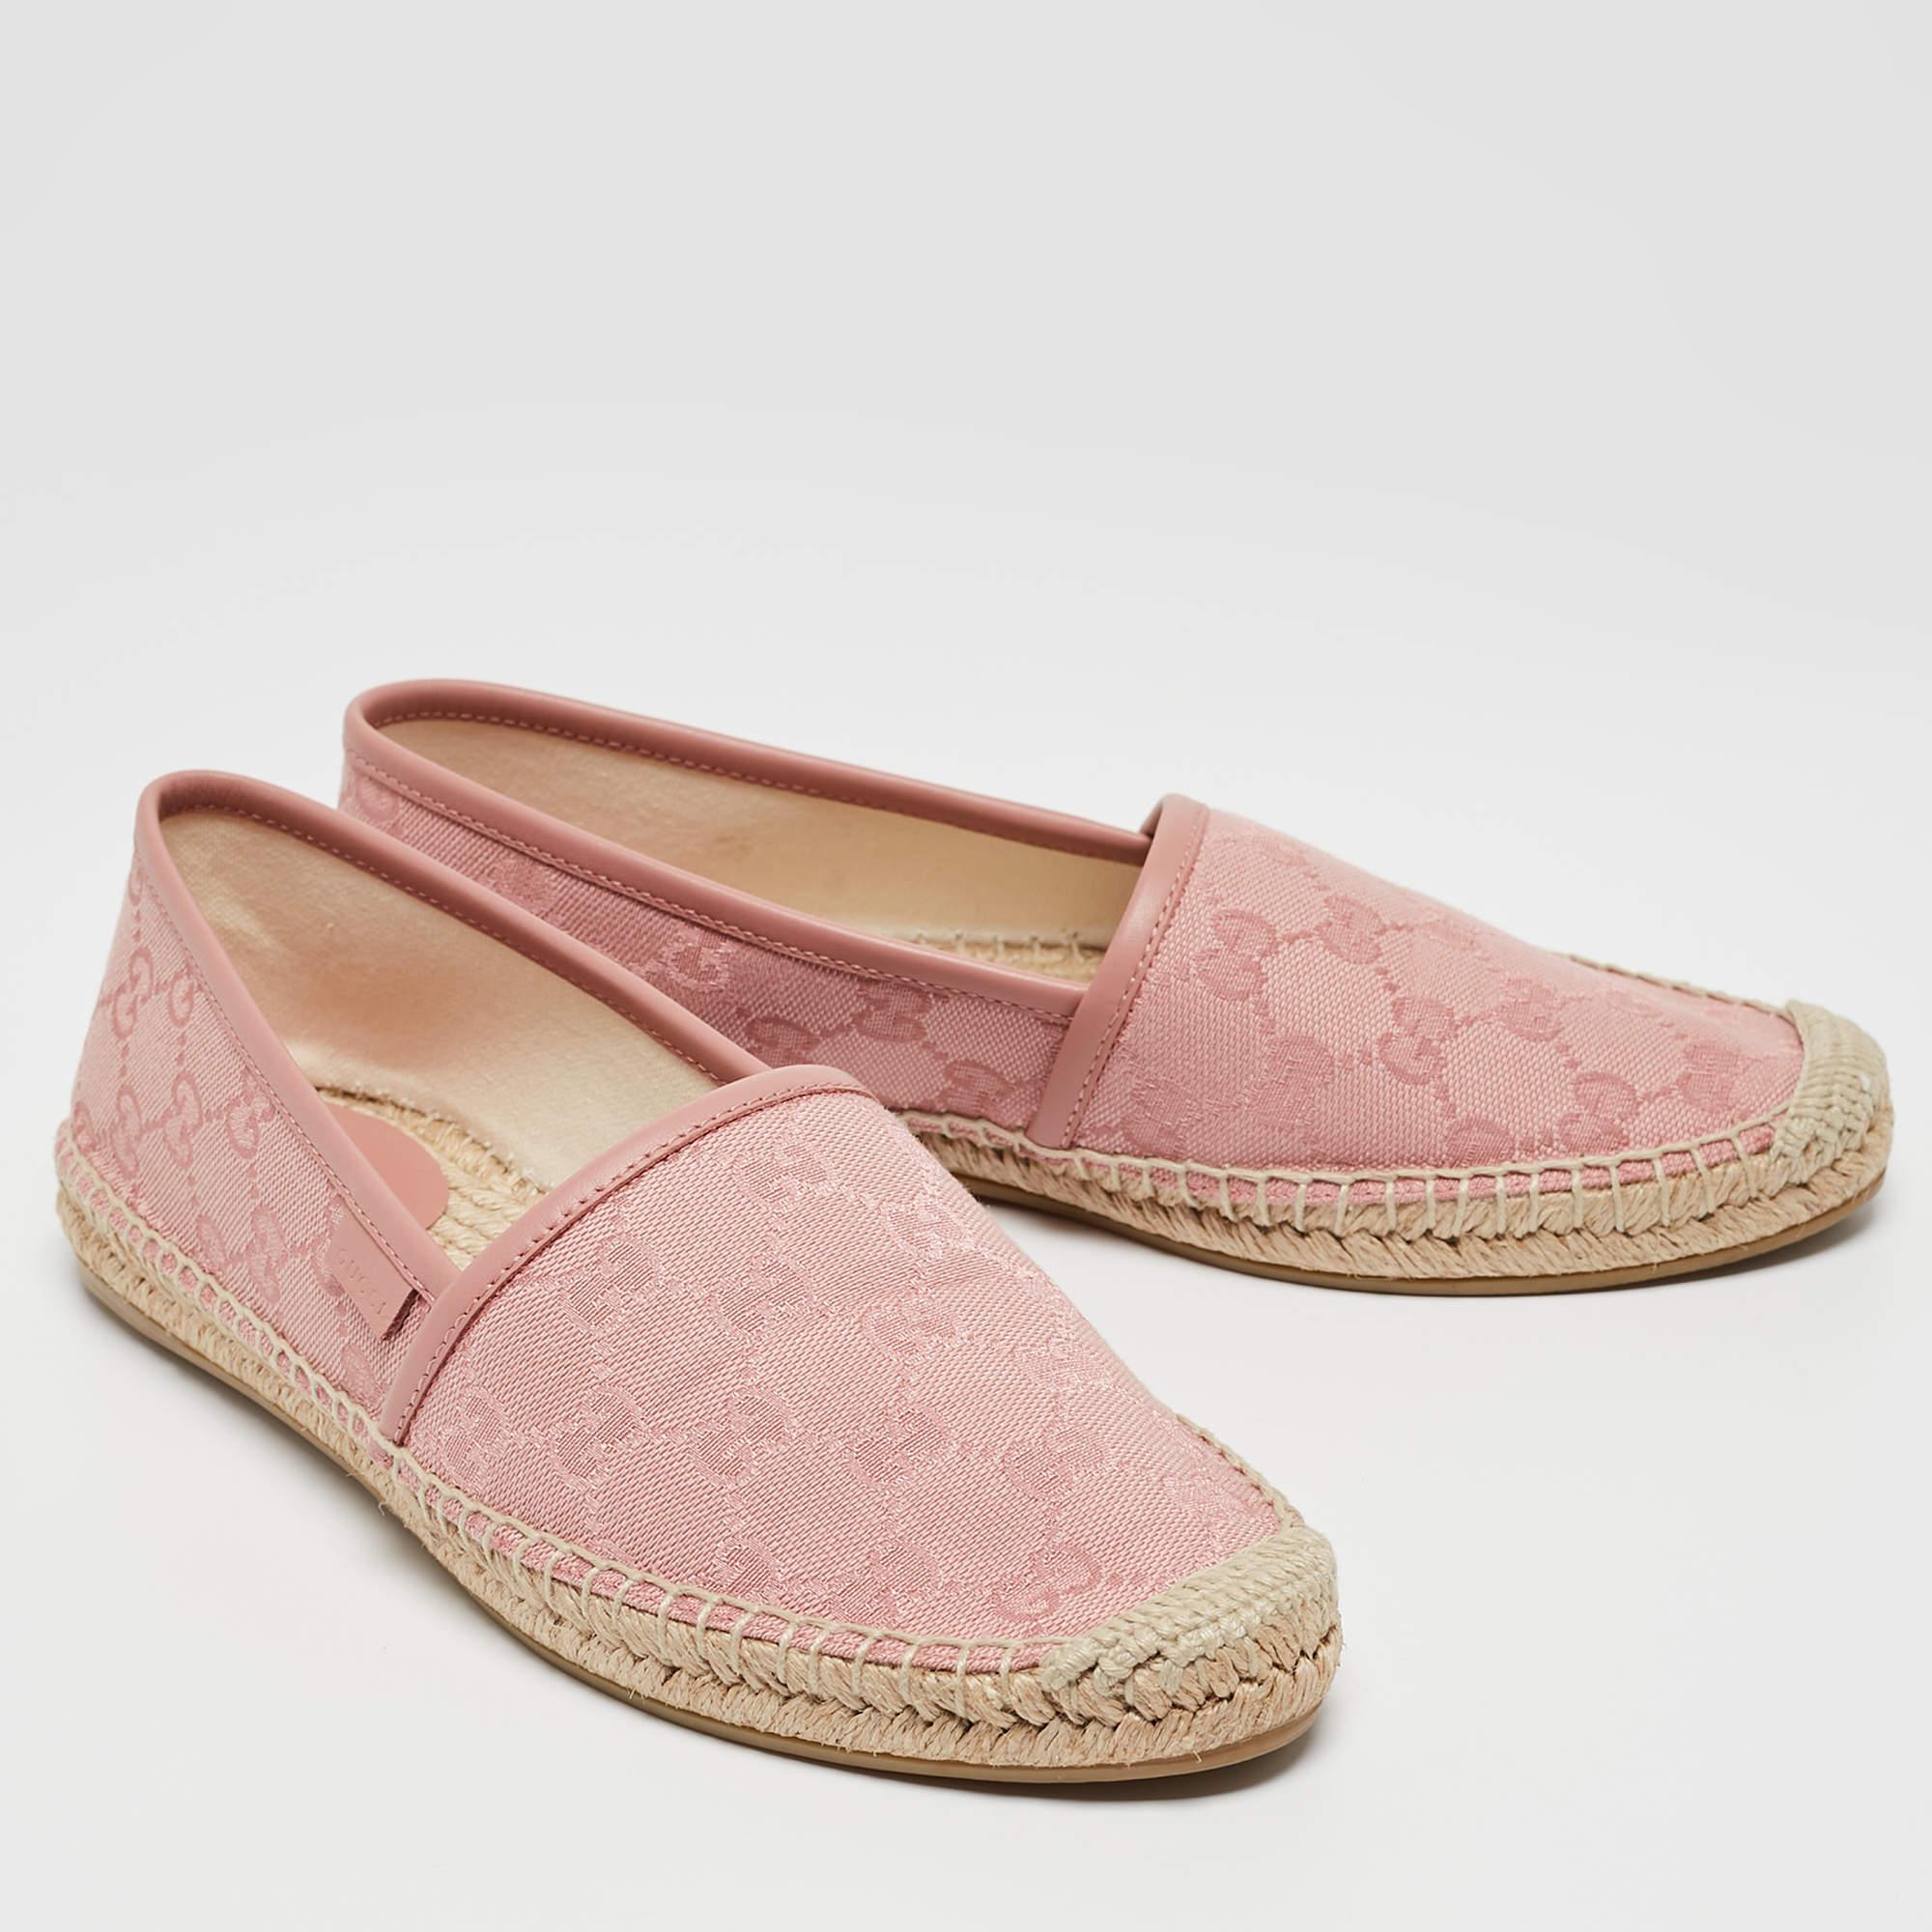 Women's Gucci Pink GG Canvas and Leather Espadrille Flats Size 38